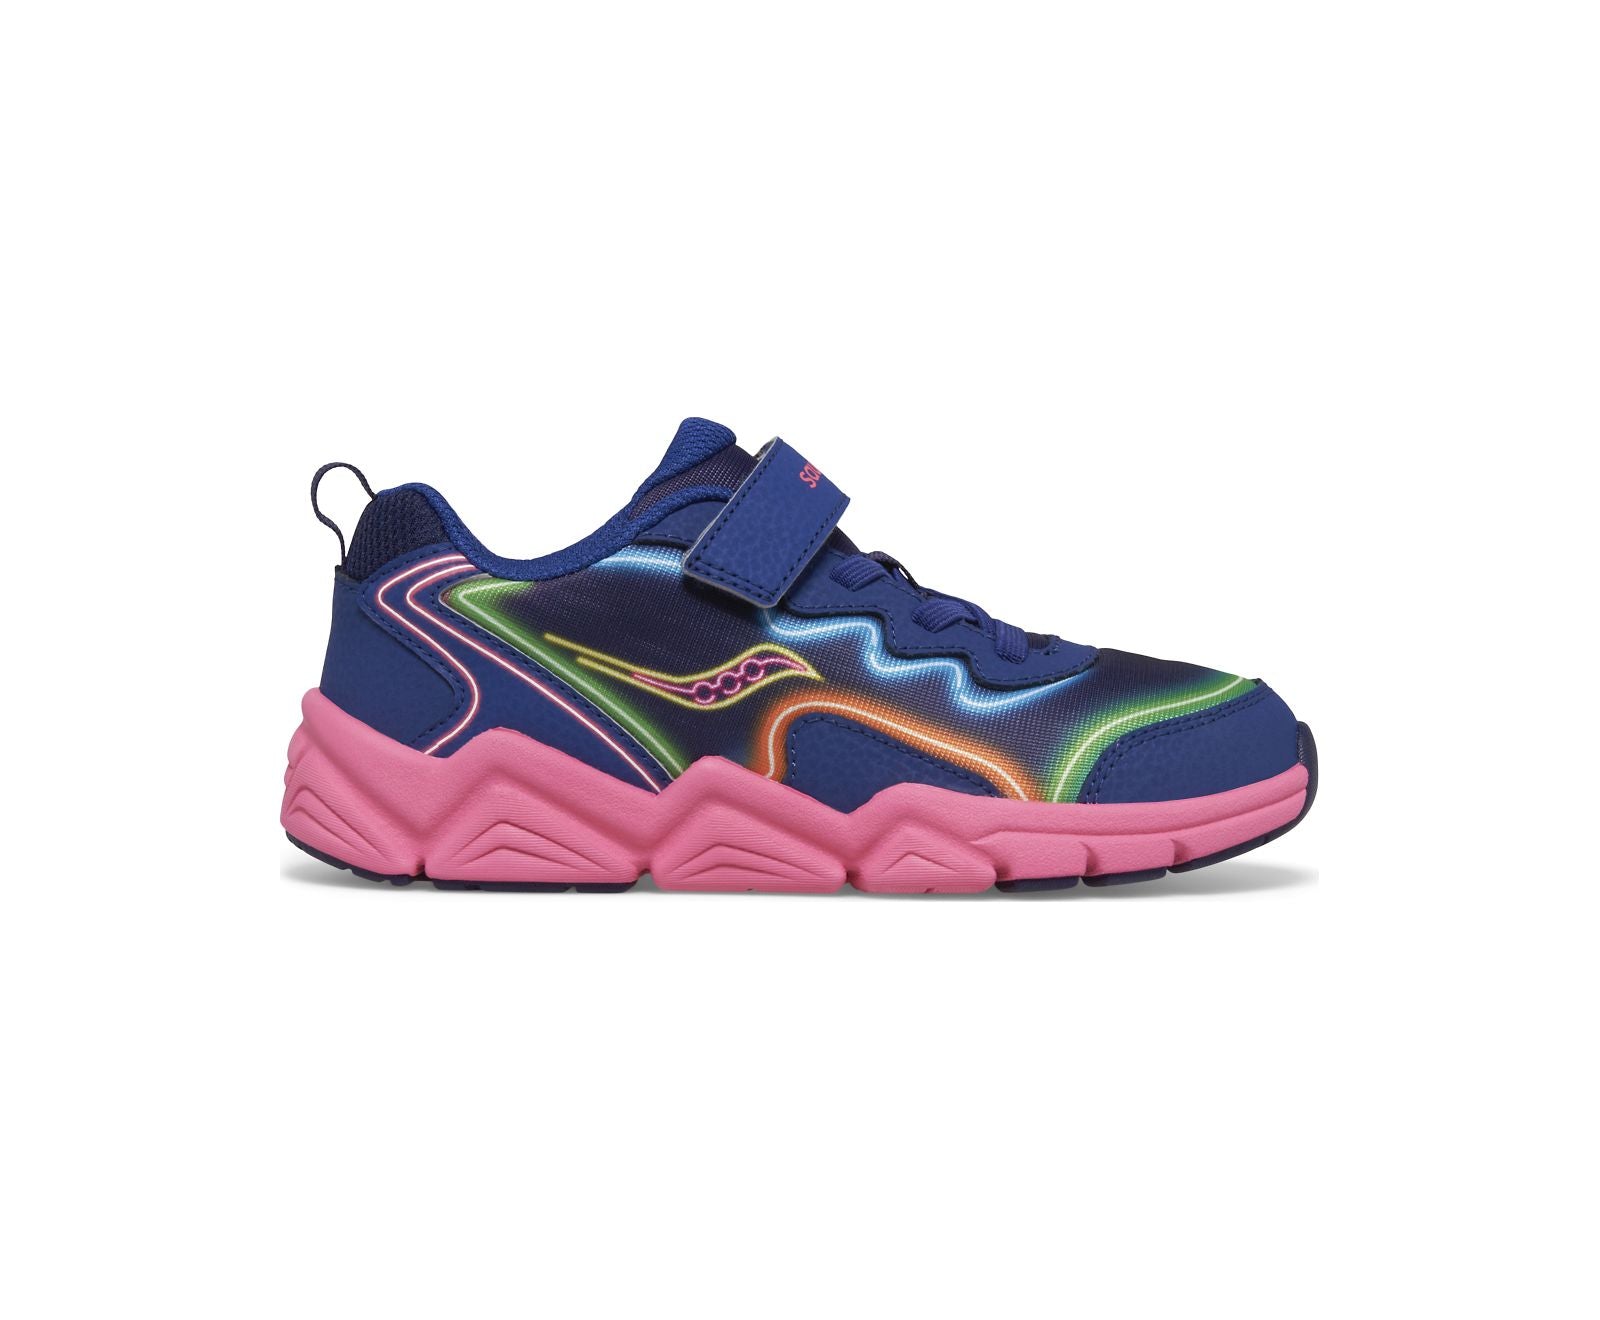 Flash 3.0 A/C Kid's Athletic Trainer - Neon/Blue/Pink